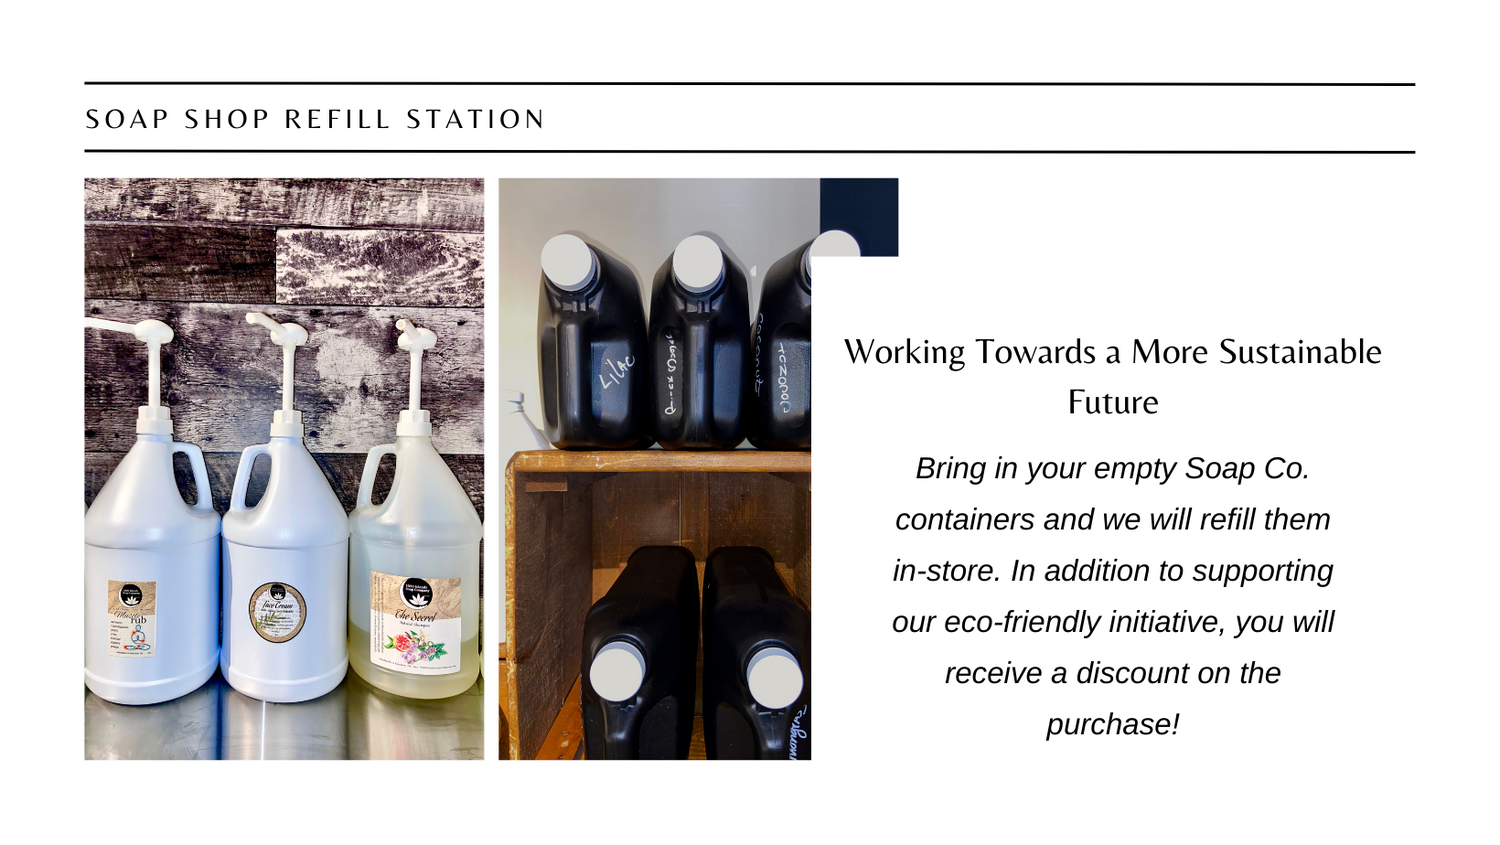 Soap co. is working towards a more sustainable future. Pictured we have our refill stations